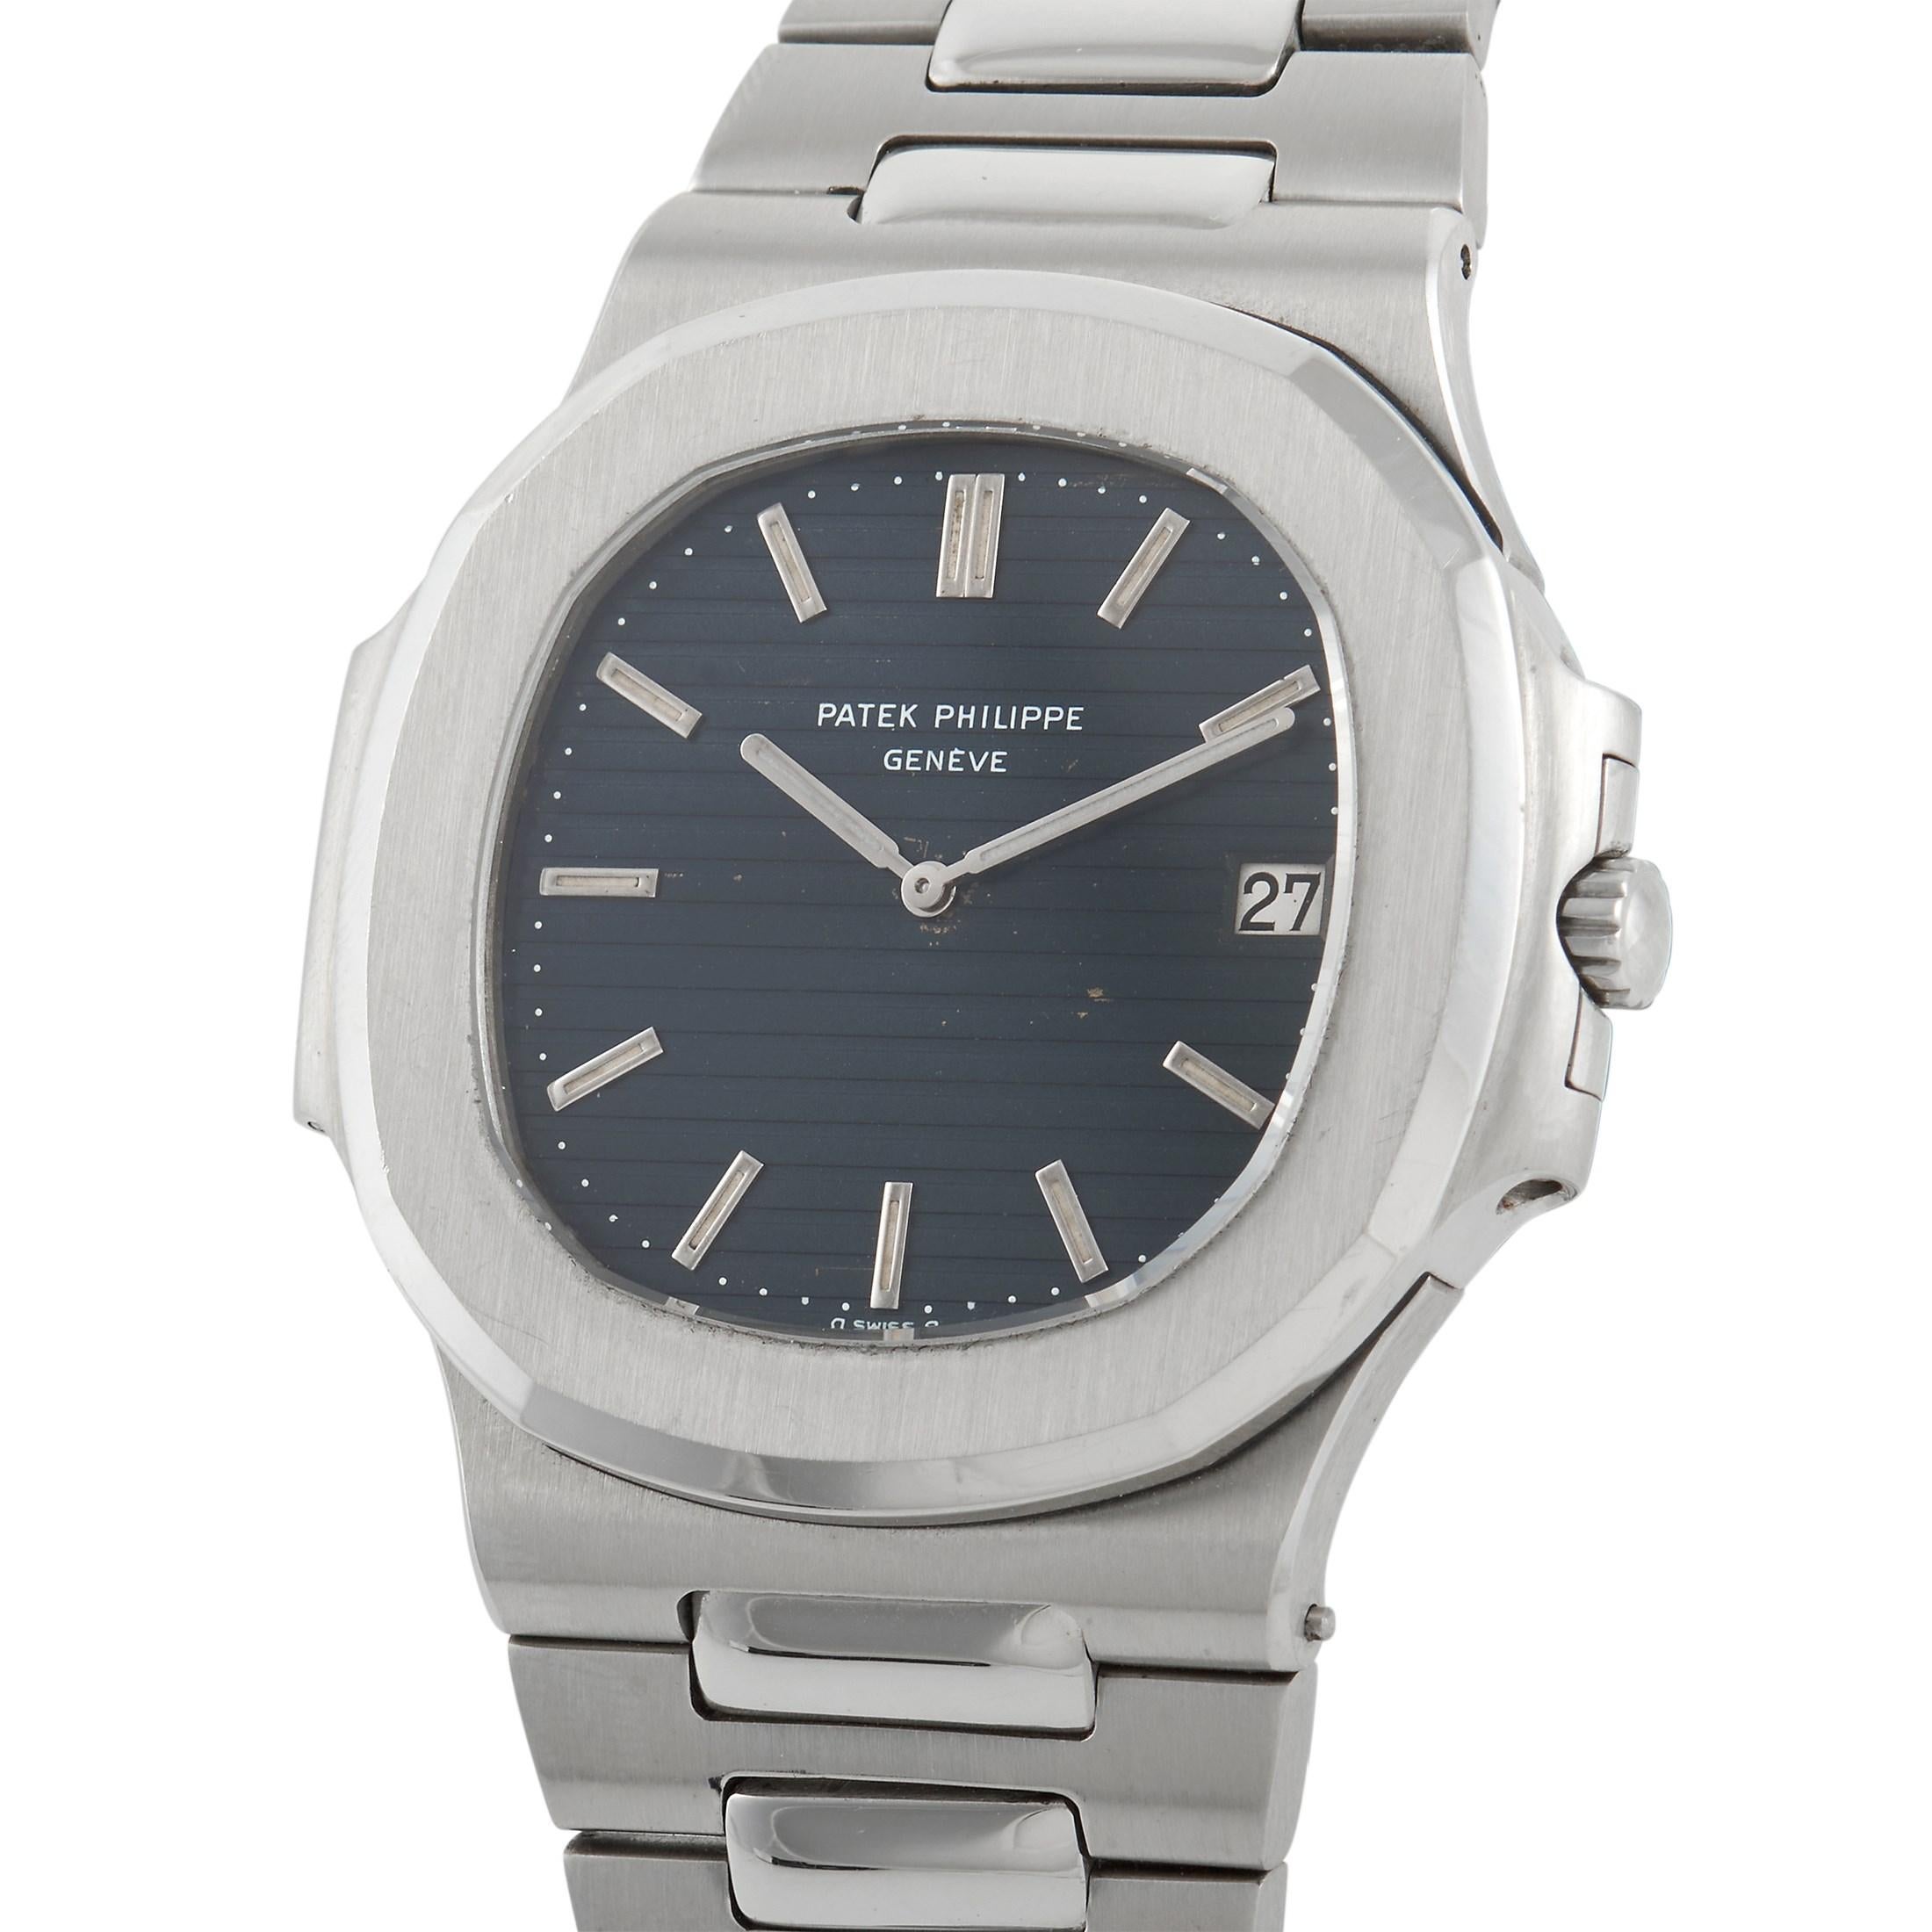 This Patek Philippe Nautilus, reference number 3700, comes with a stainless steel case that measures 42 mm in diameter. The case is presented on a matching stainless steel bracelet. This black dial displays hours, minutes, and the date at the 3